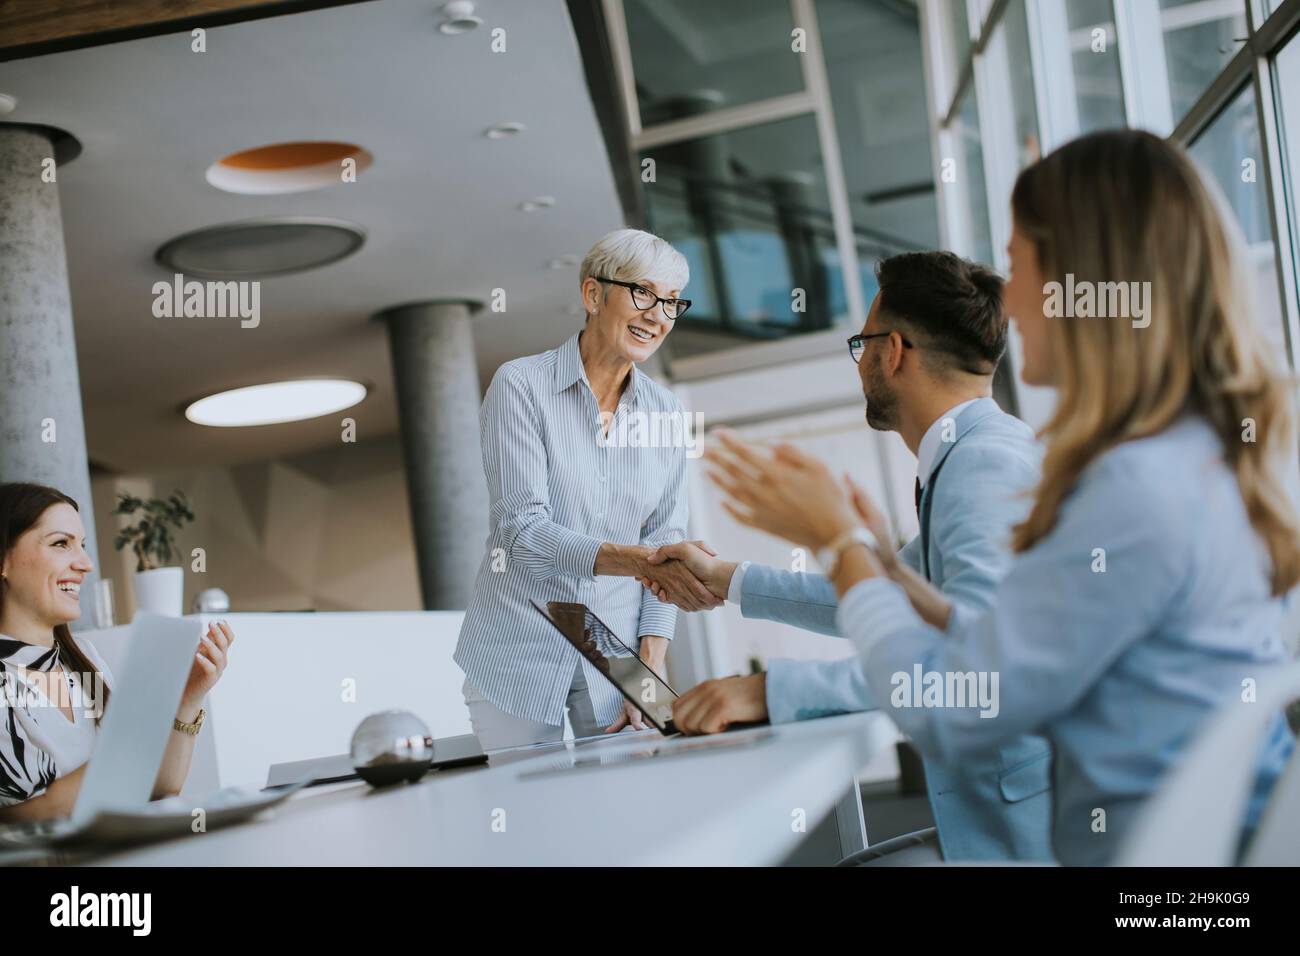 Mature business woman handshaking with young colleague on a meeting in the office Stock Photo